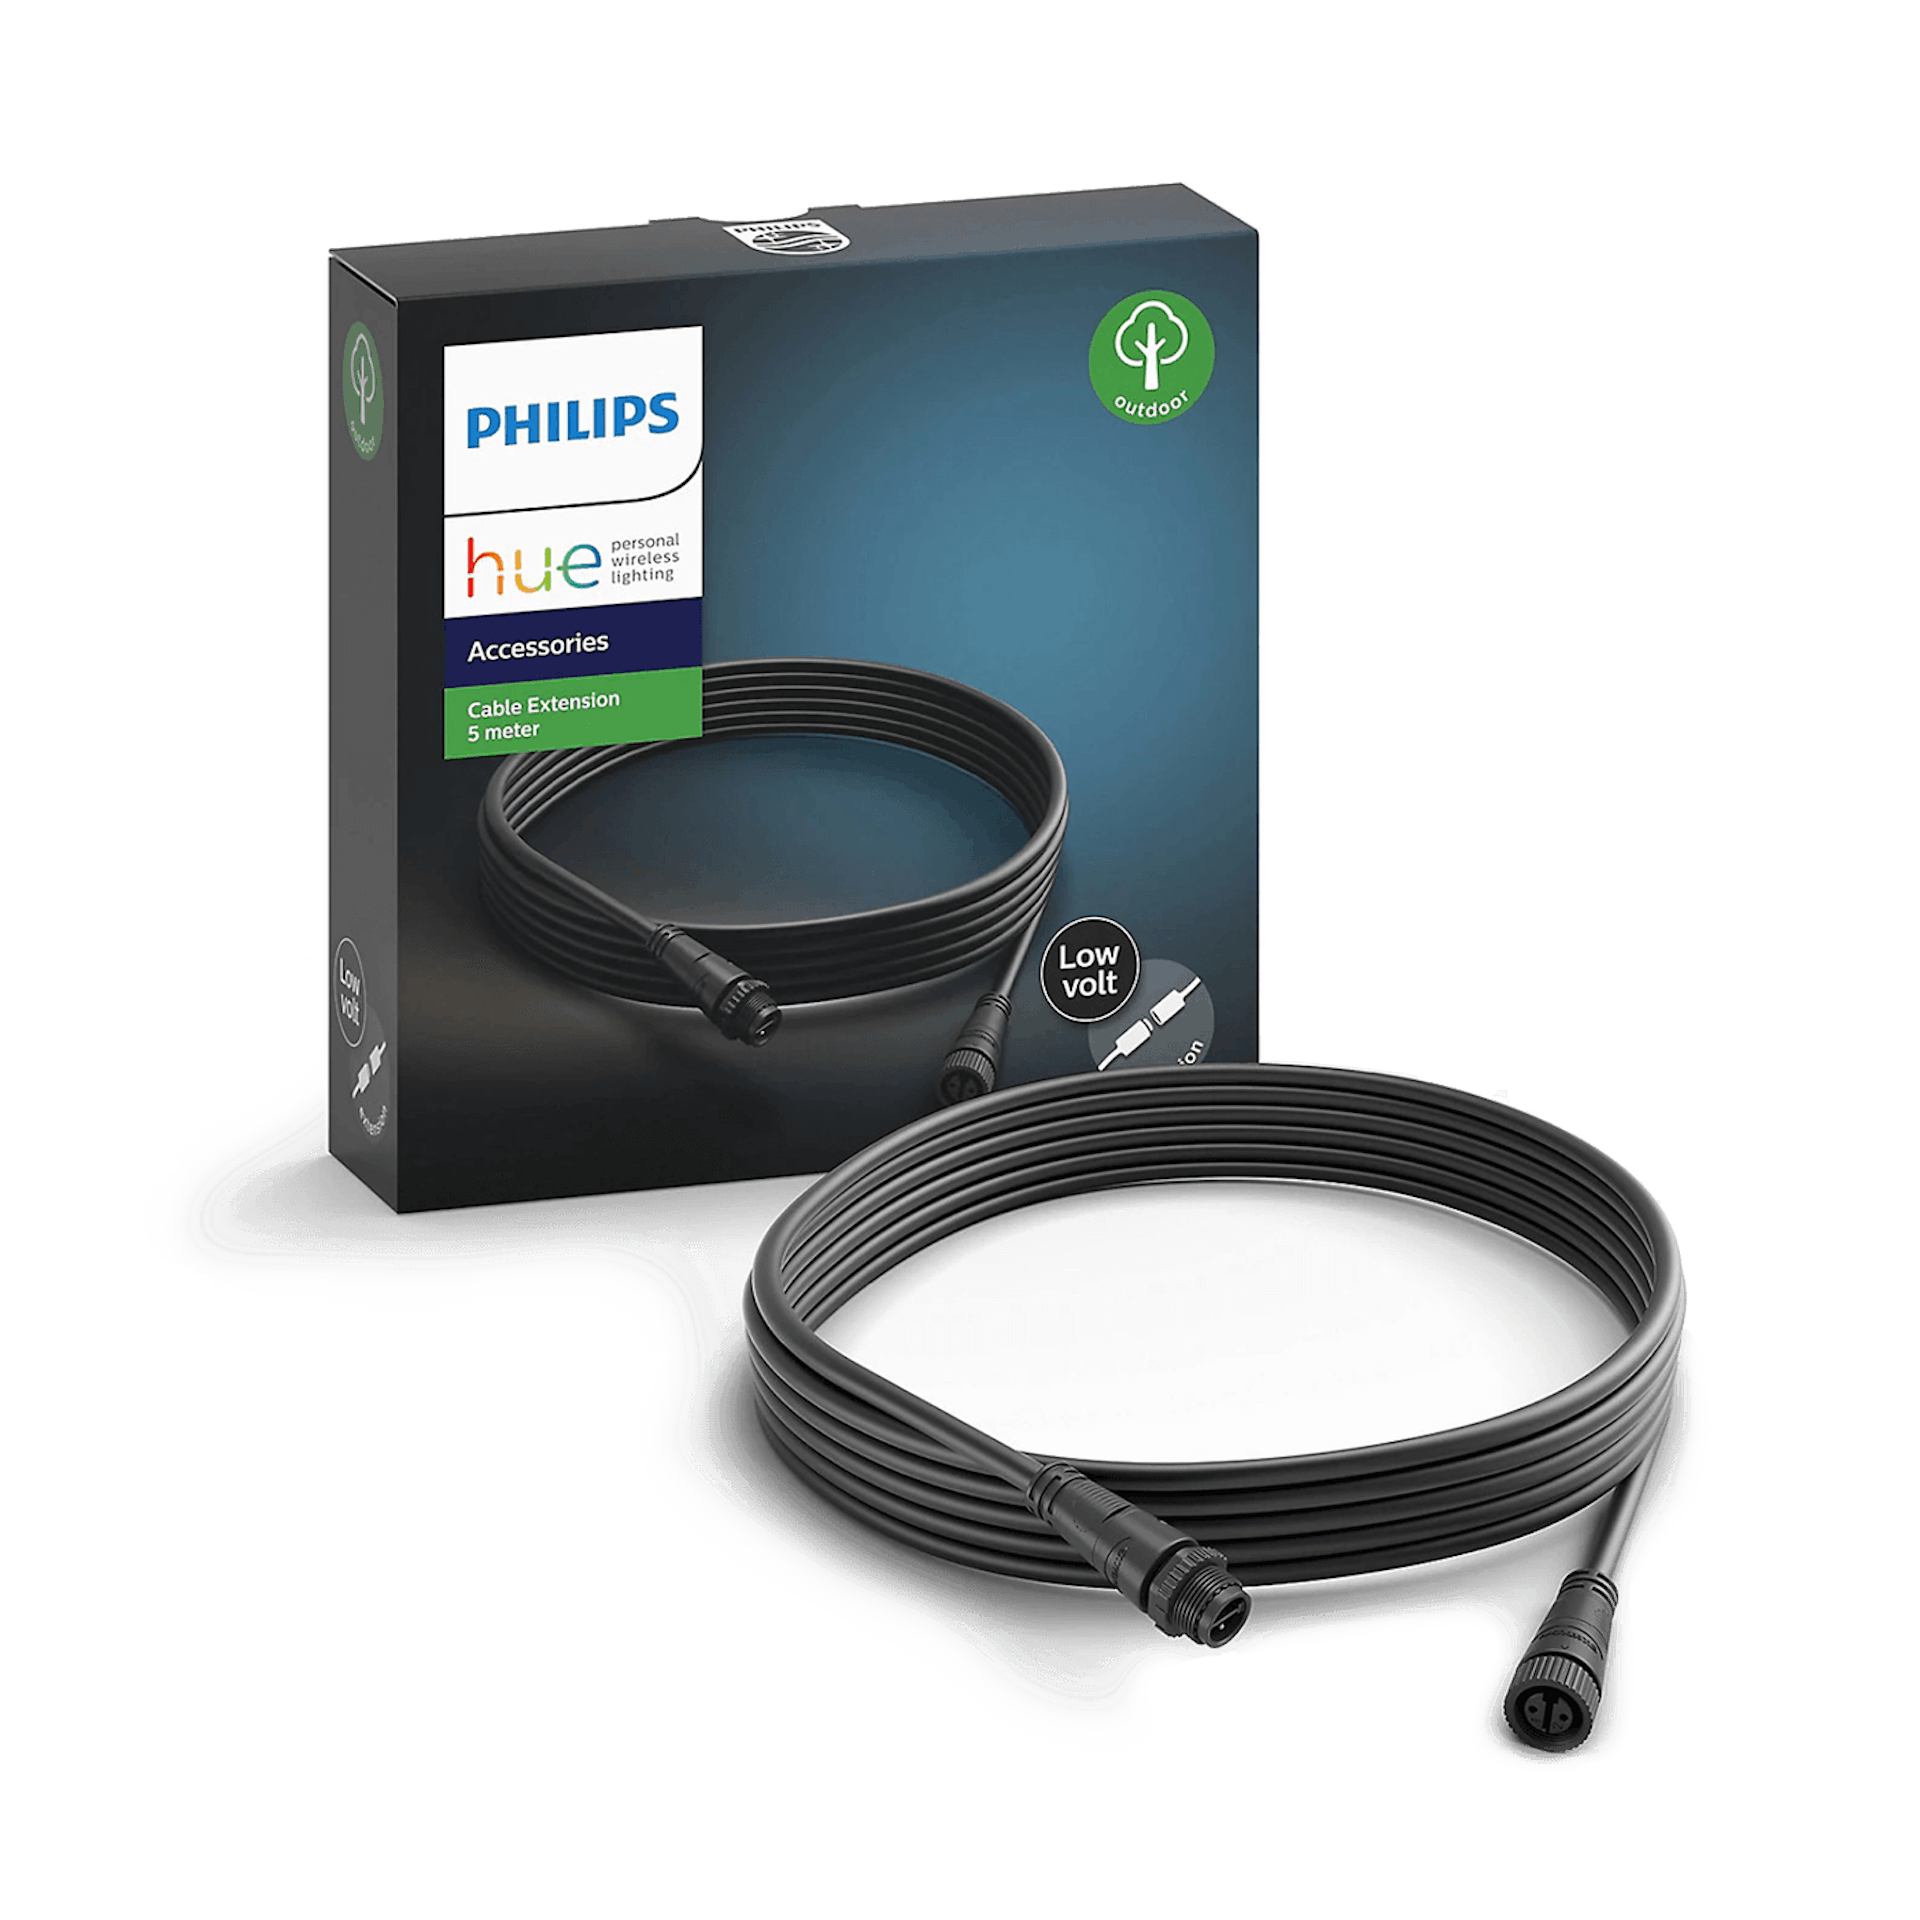 Philips Hue Extension Cord - Image 2